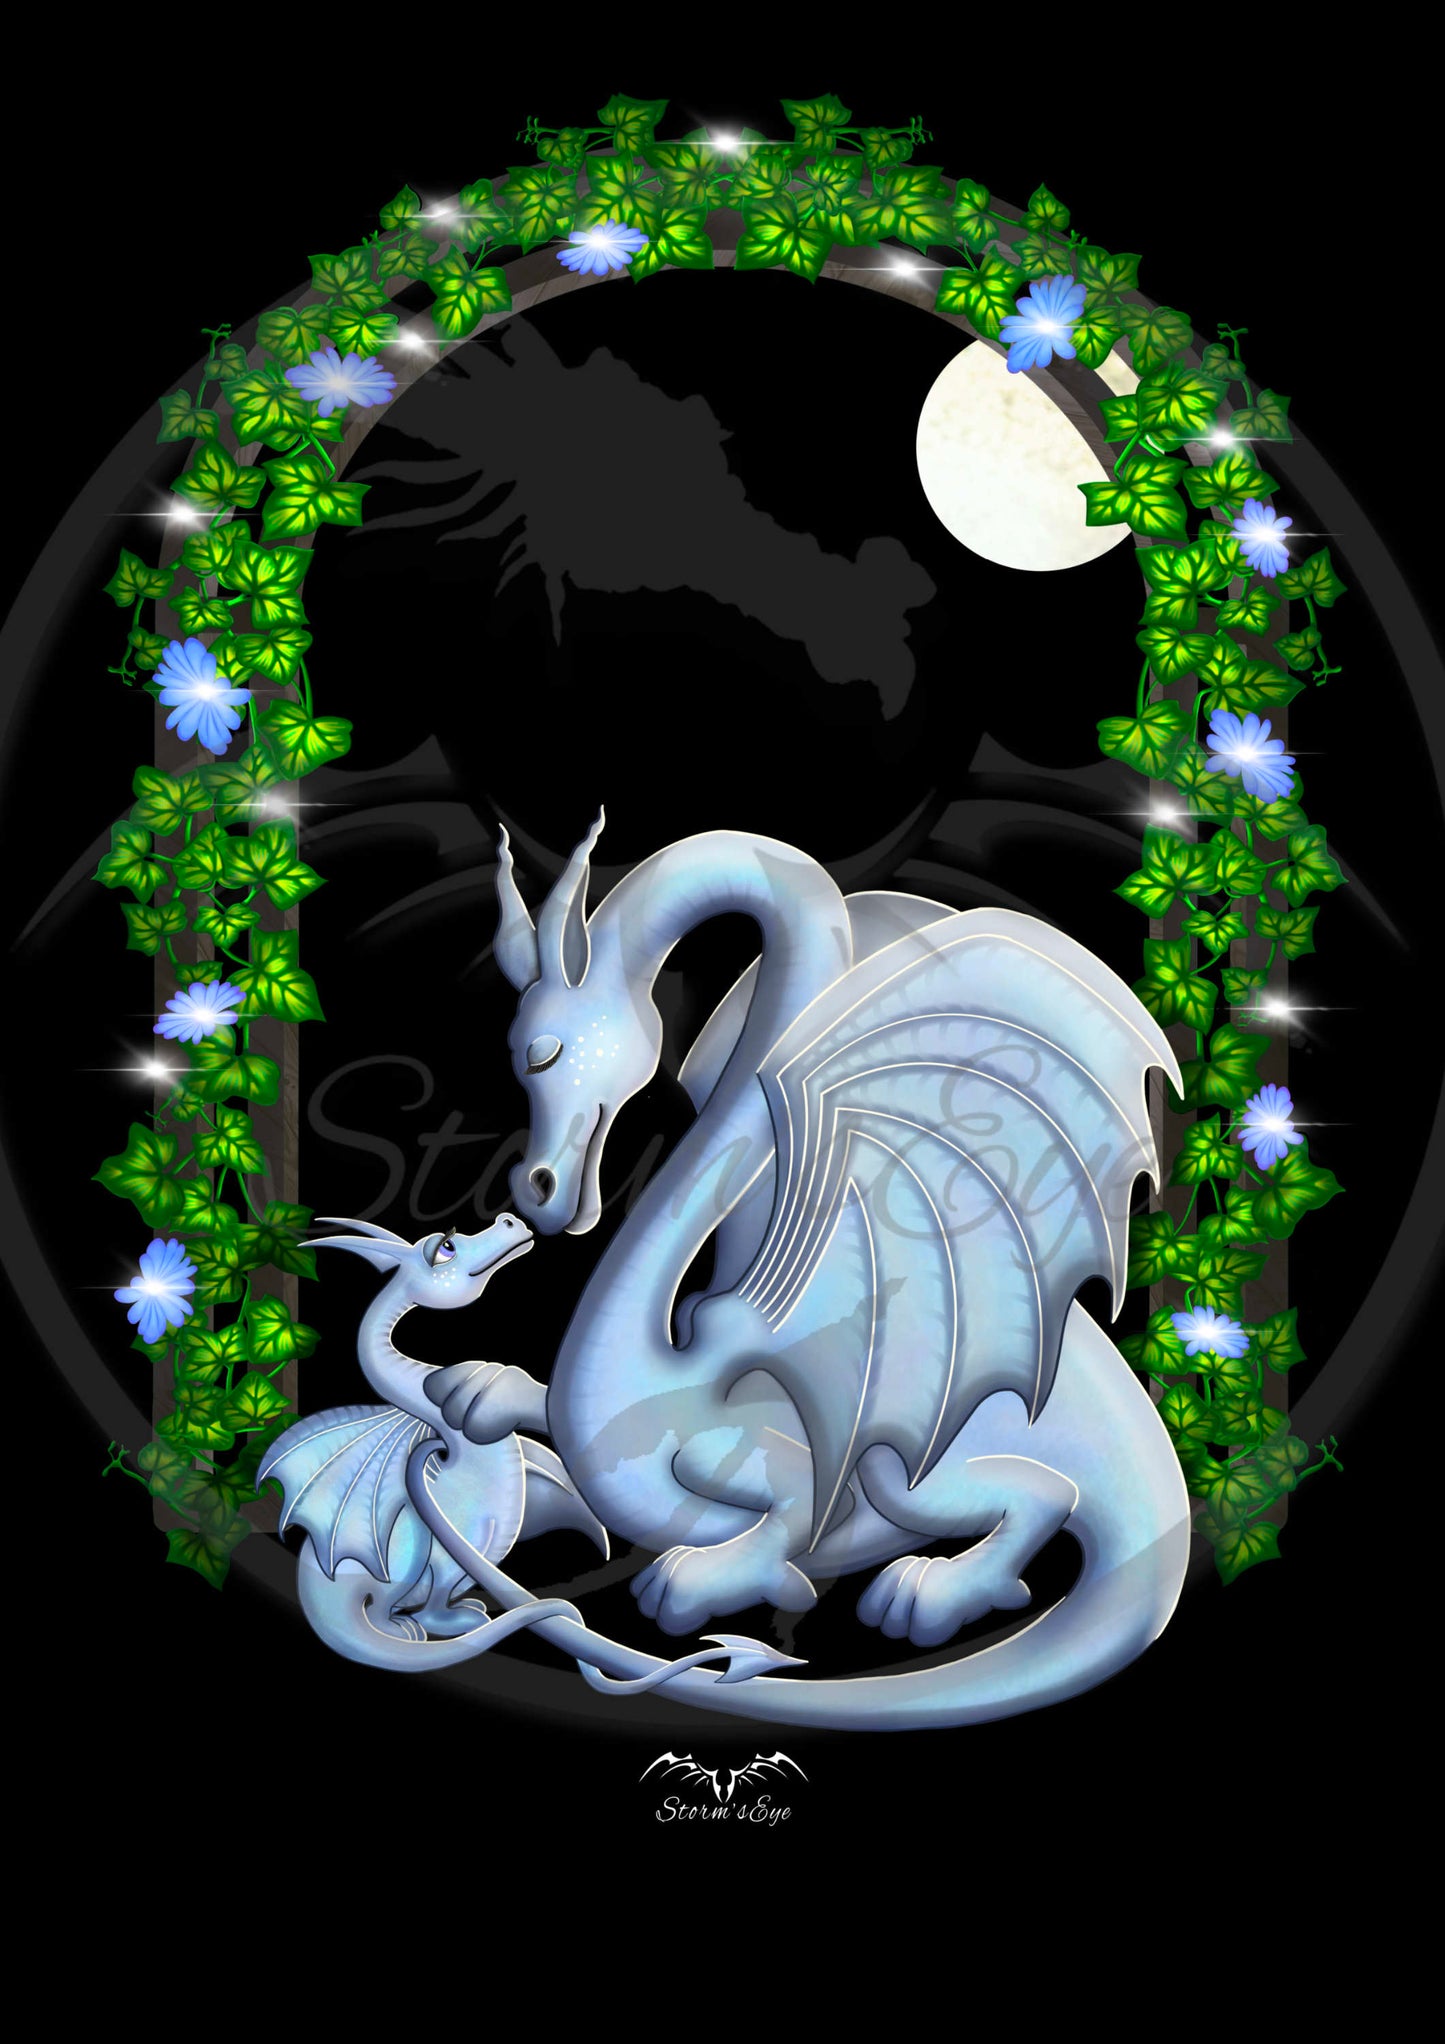 Mother And Baby Dragon design, by Stormseye Design